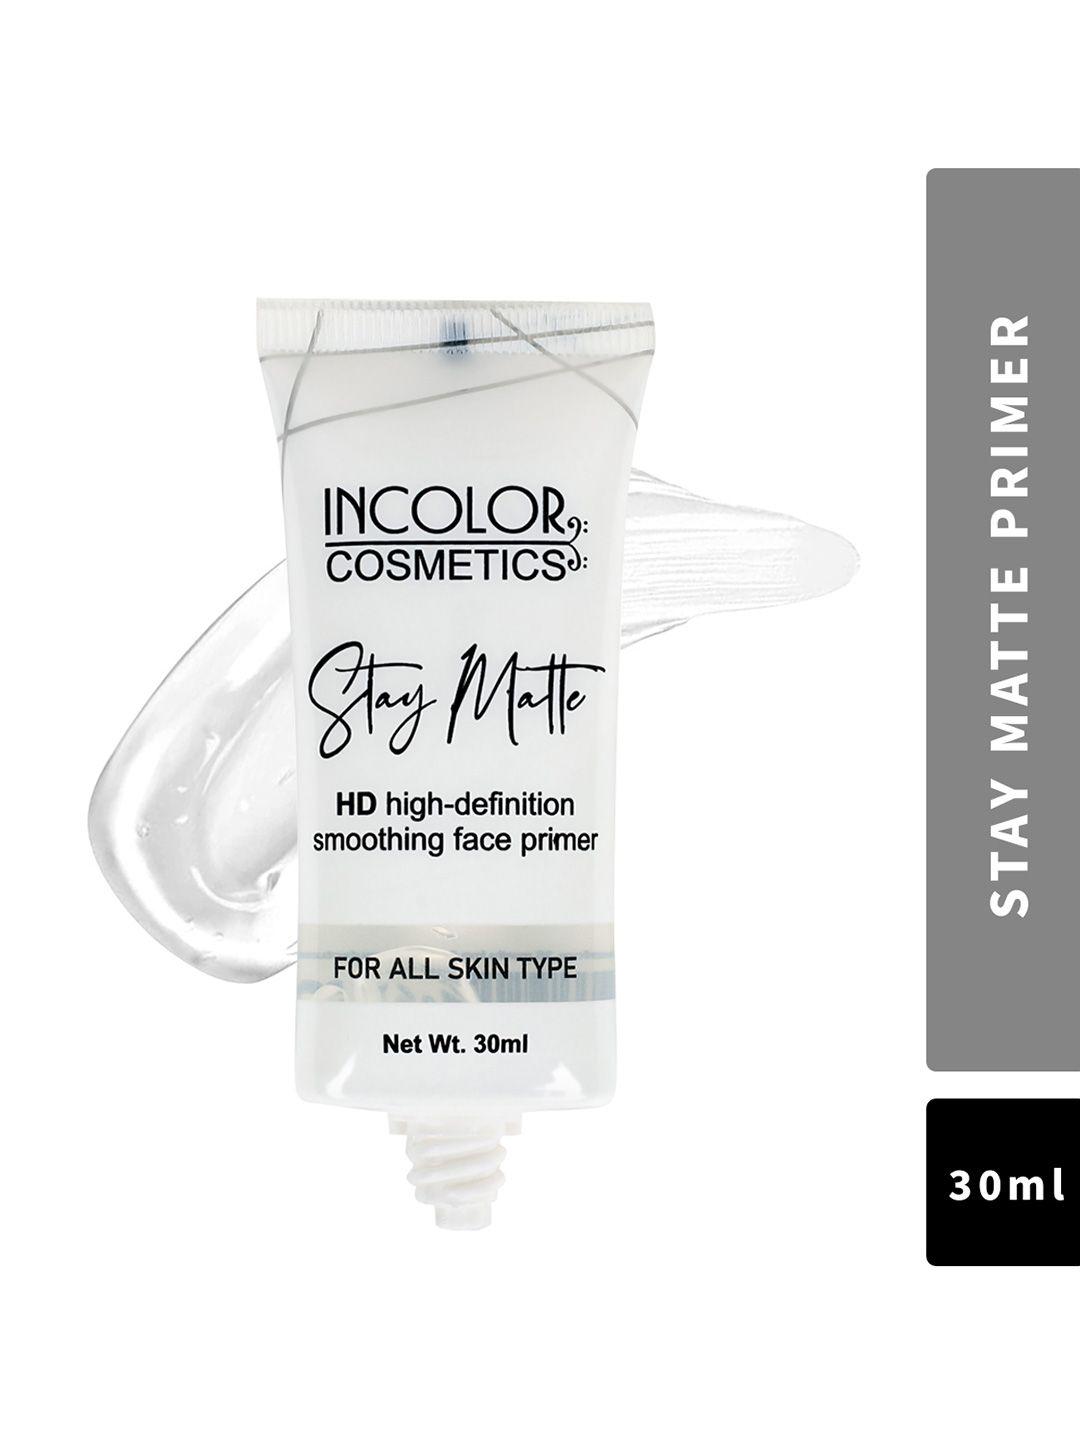 incolor stay matte hd smoothening face primer for all skin type - 30 ml